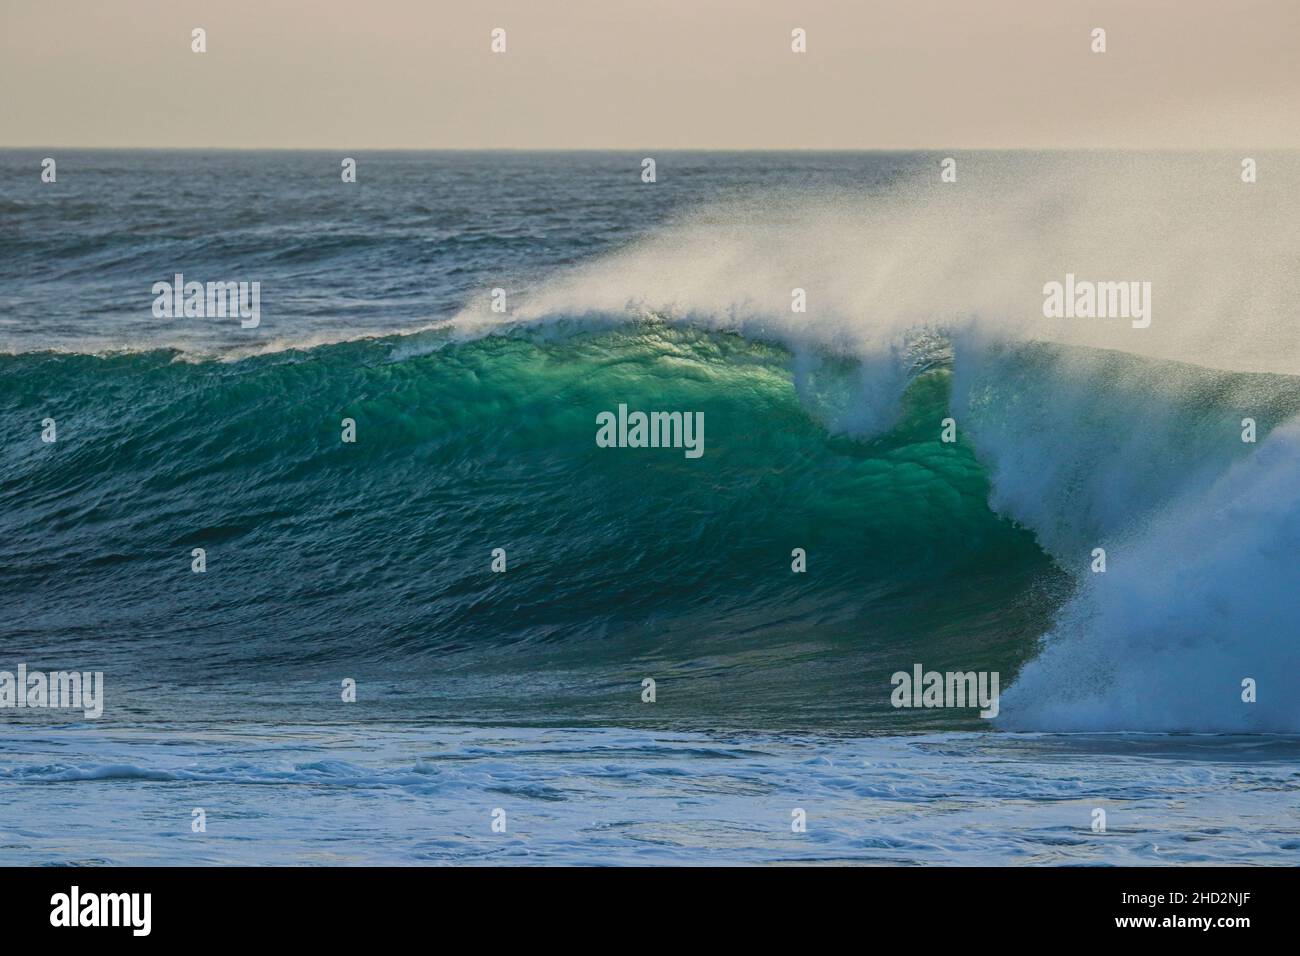 Perfect wave breaking in a beach. Surf spot Stock Photo